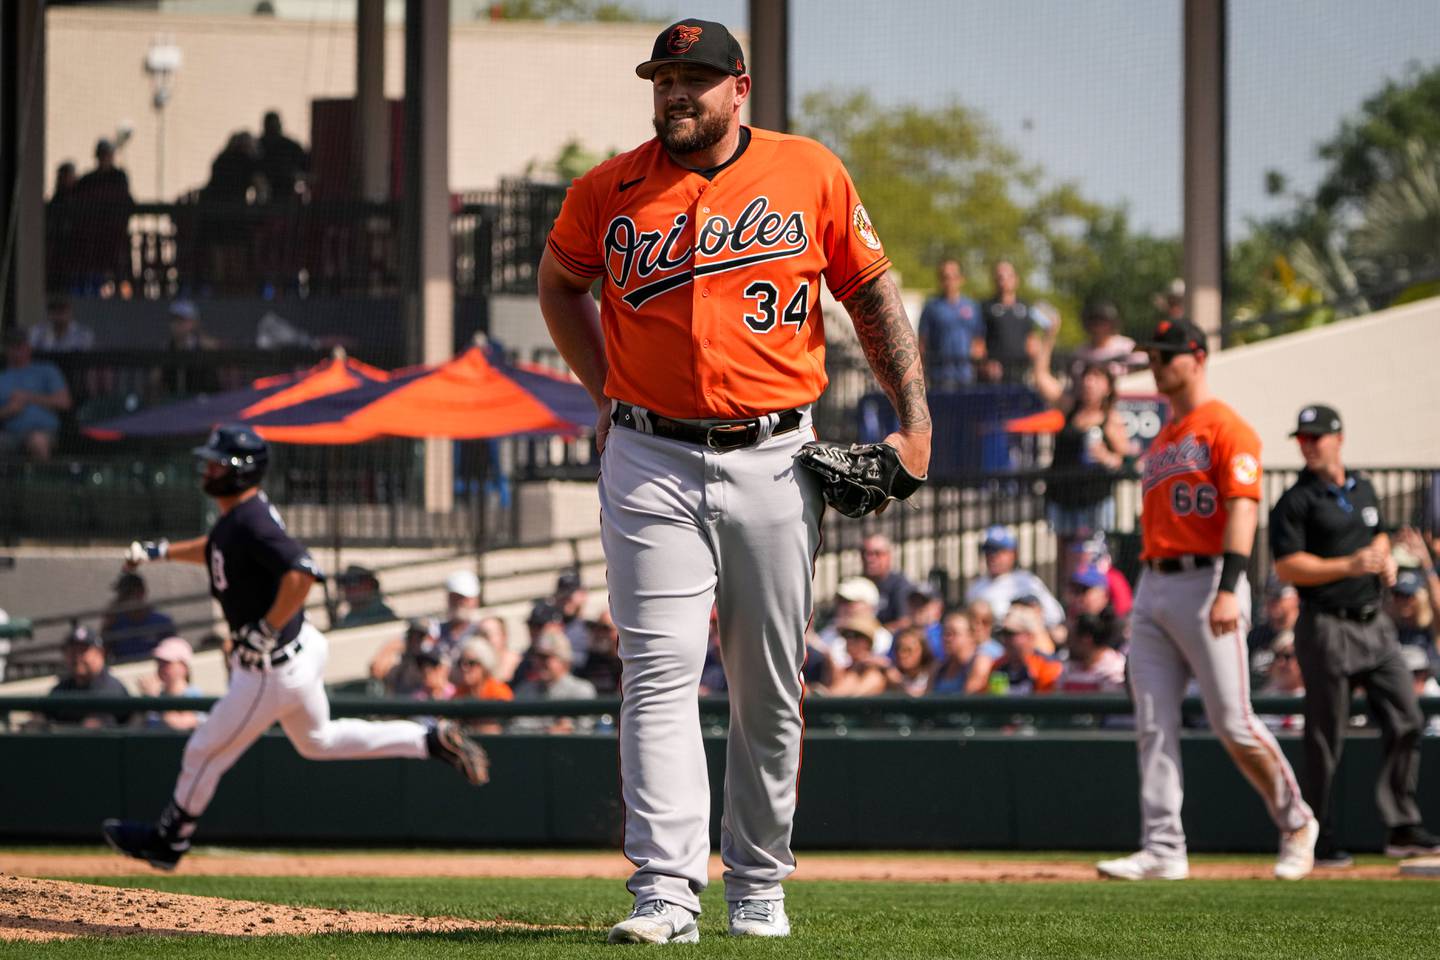 Joey Krehbiel (34) reacts to allowing multiple runs at Publix Field at Joker Marchant Stadium during the fifth inning of a game against the Detroit Tigers on 3/2/23. The Baltimore Orioles traveled to Lakeland to play the Tigers in the Florida Grapefruit League.